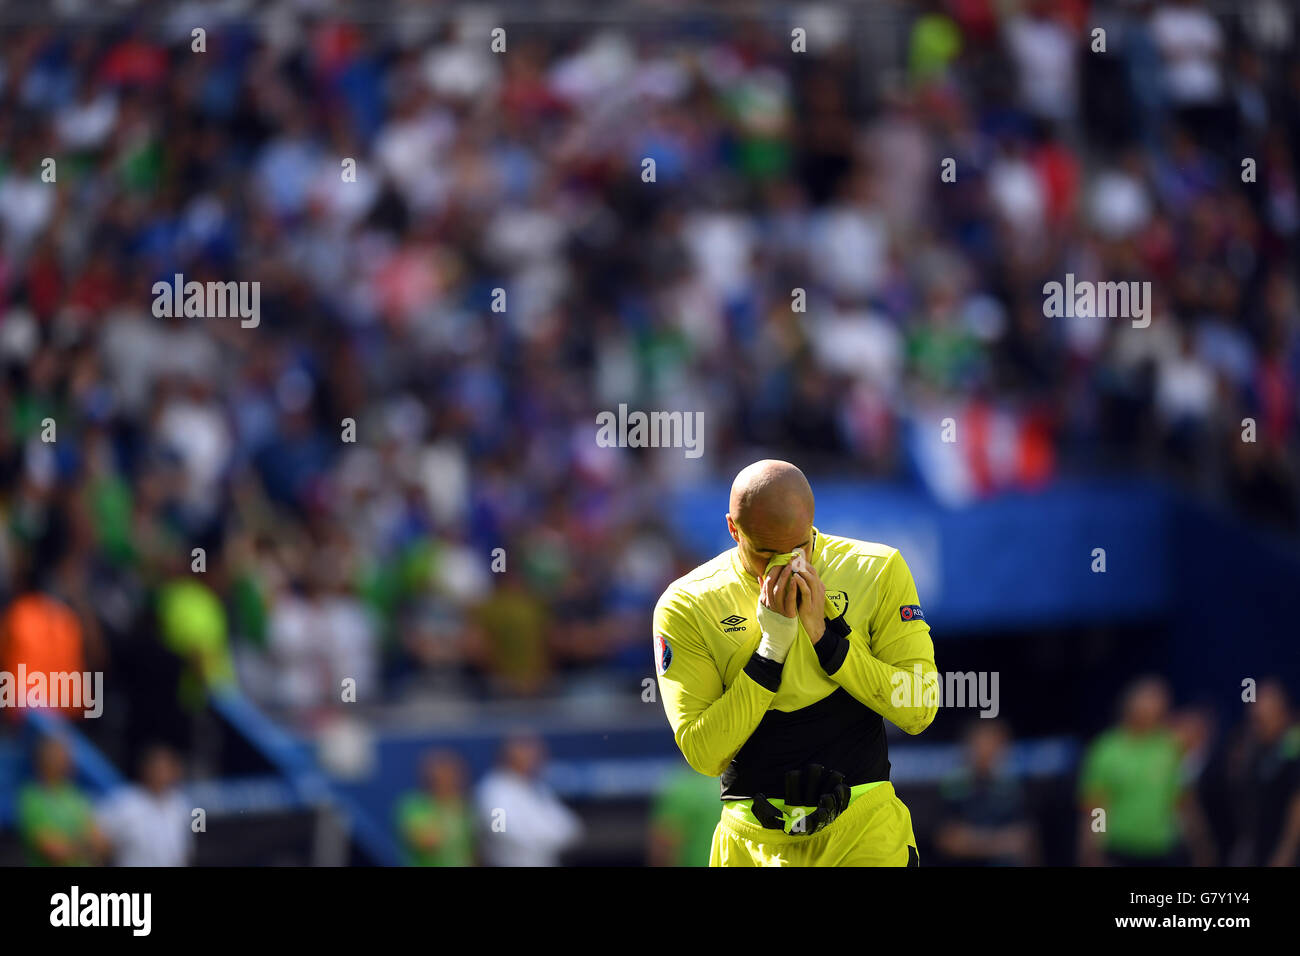 Lyon, France. 26th June, 2016. Goalkeeper Darren Randolph of Ireland reacts after the UEFA EURO 2016 Round of 16 soccer match between France and Ireland at the Stade de Lyon in Lyon, France, 26 June 2016. Photo: Federico Gambarini/dpa/Alamy Live News Stock Photo